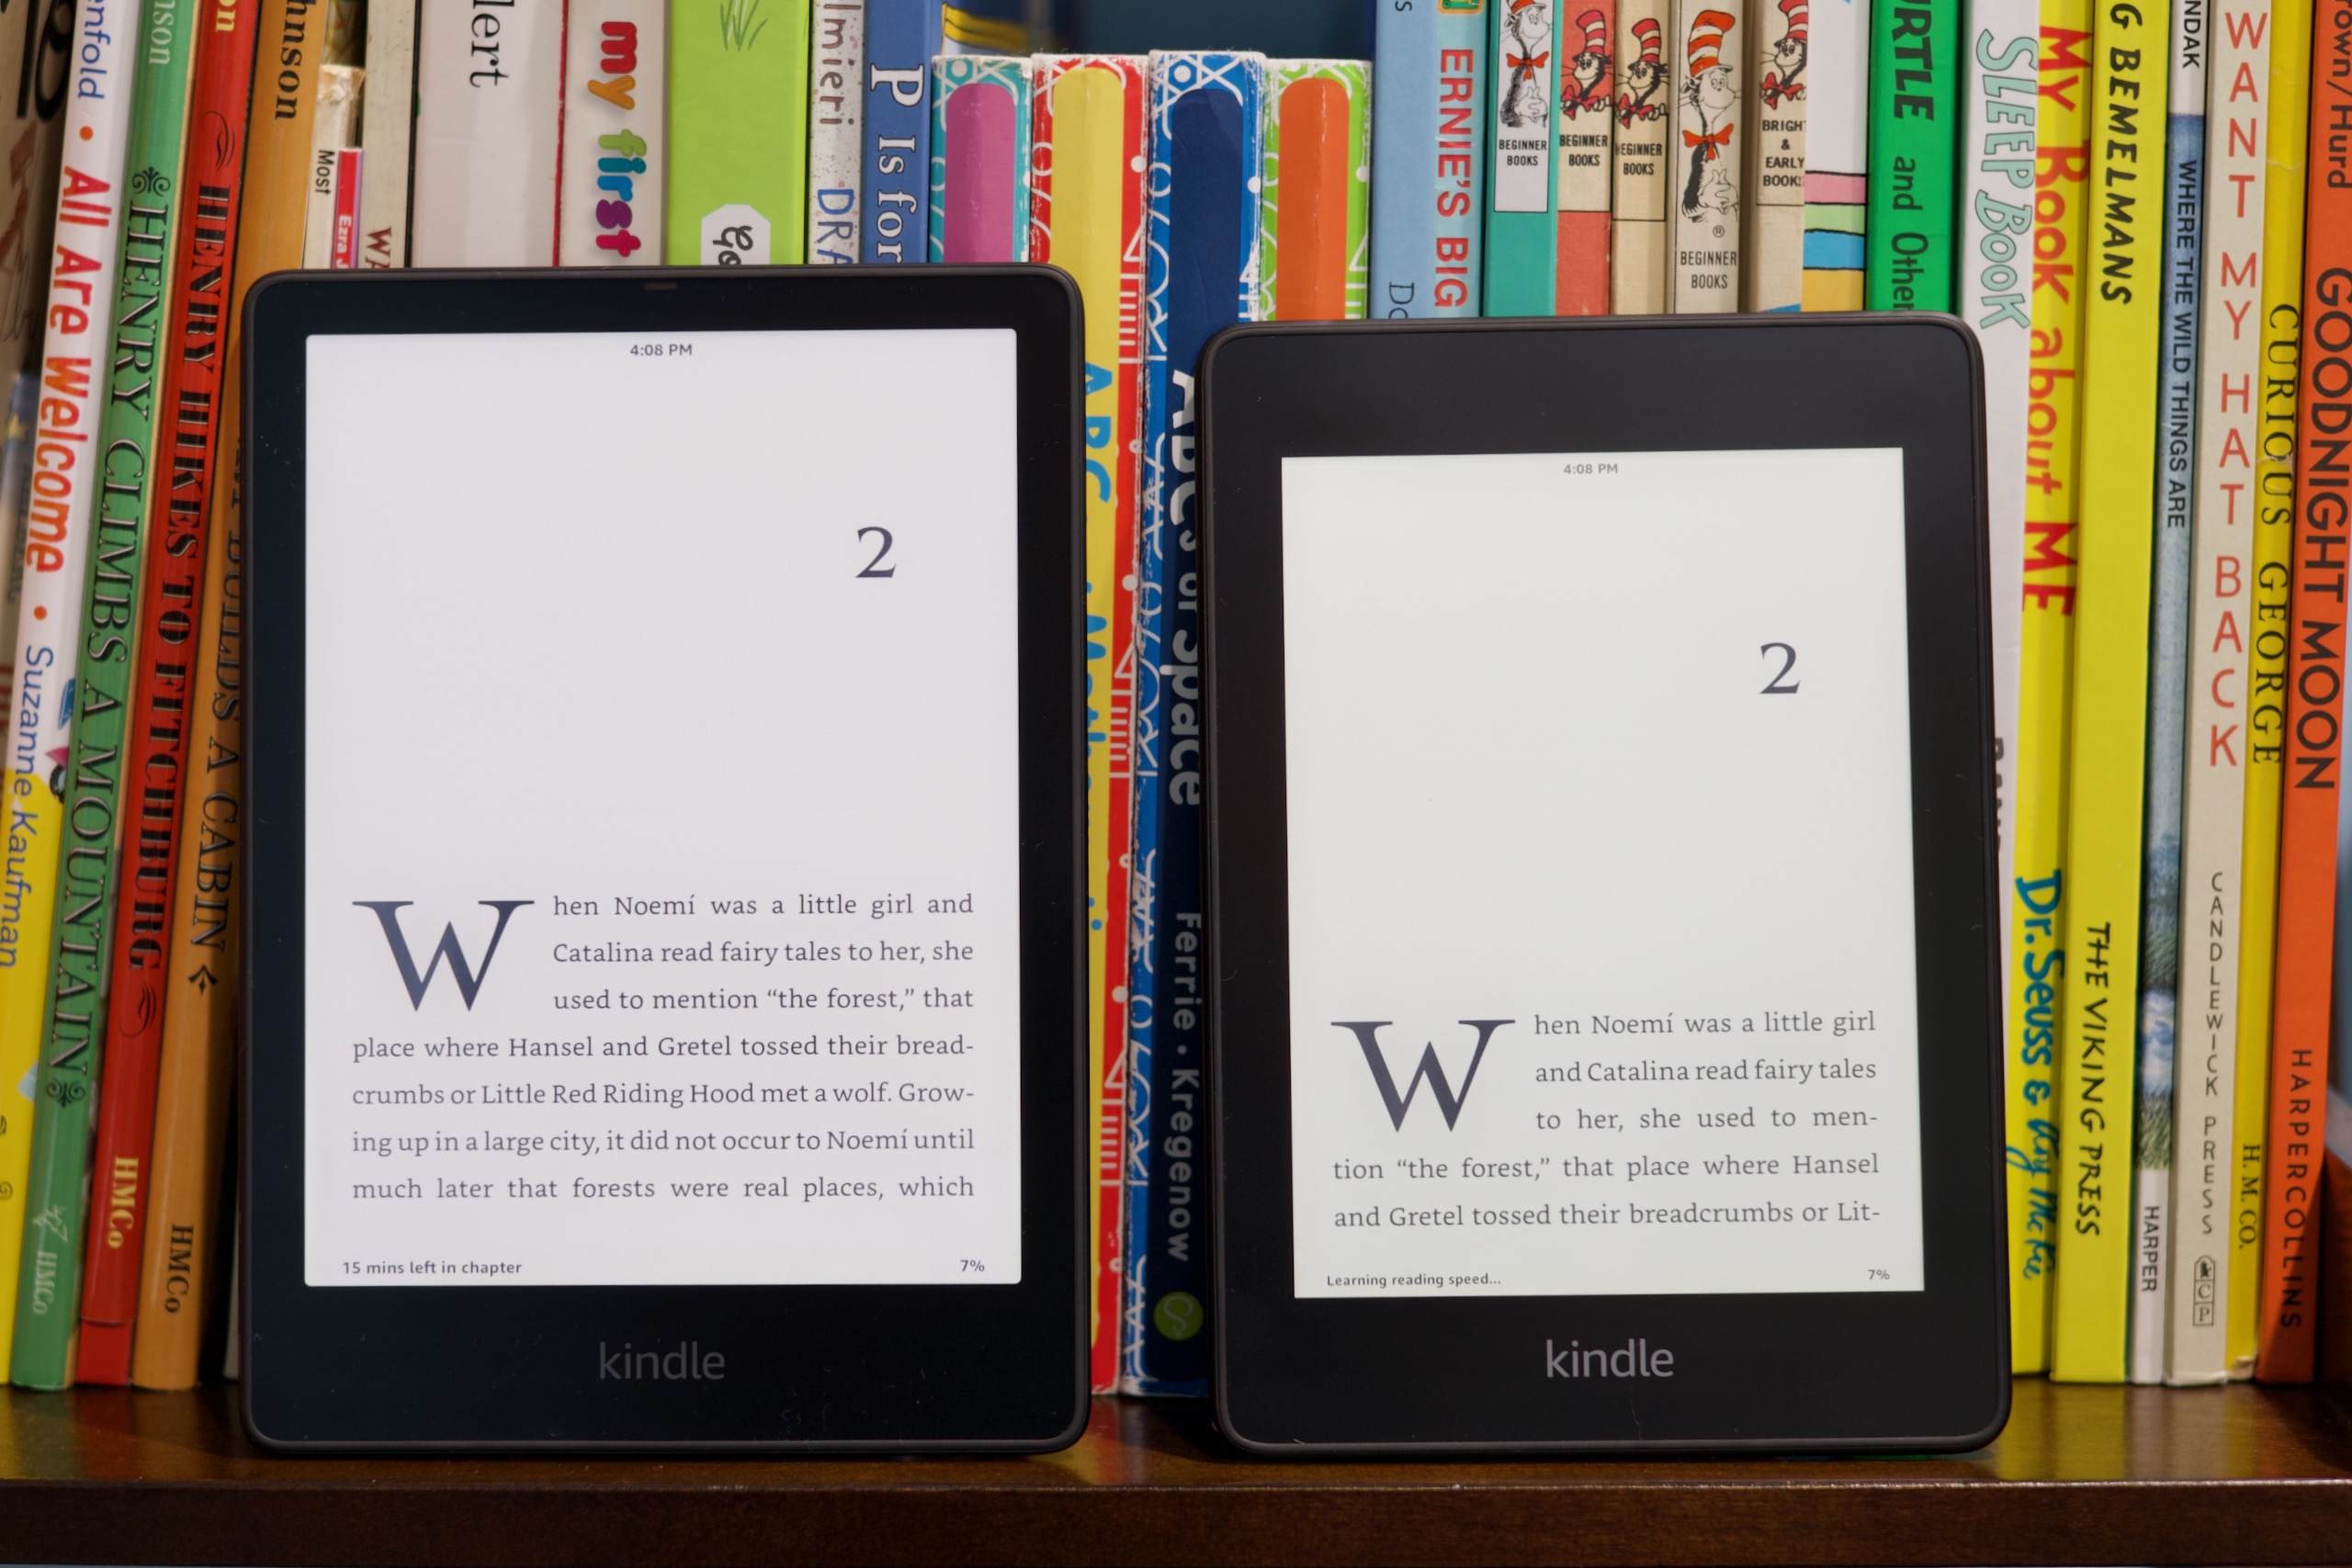 The new Paperwhite (left) has a 6.8-inch screen, which looks and feels much larger than the old model's 6-inch display (right).